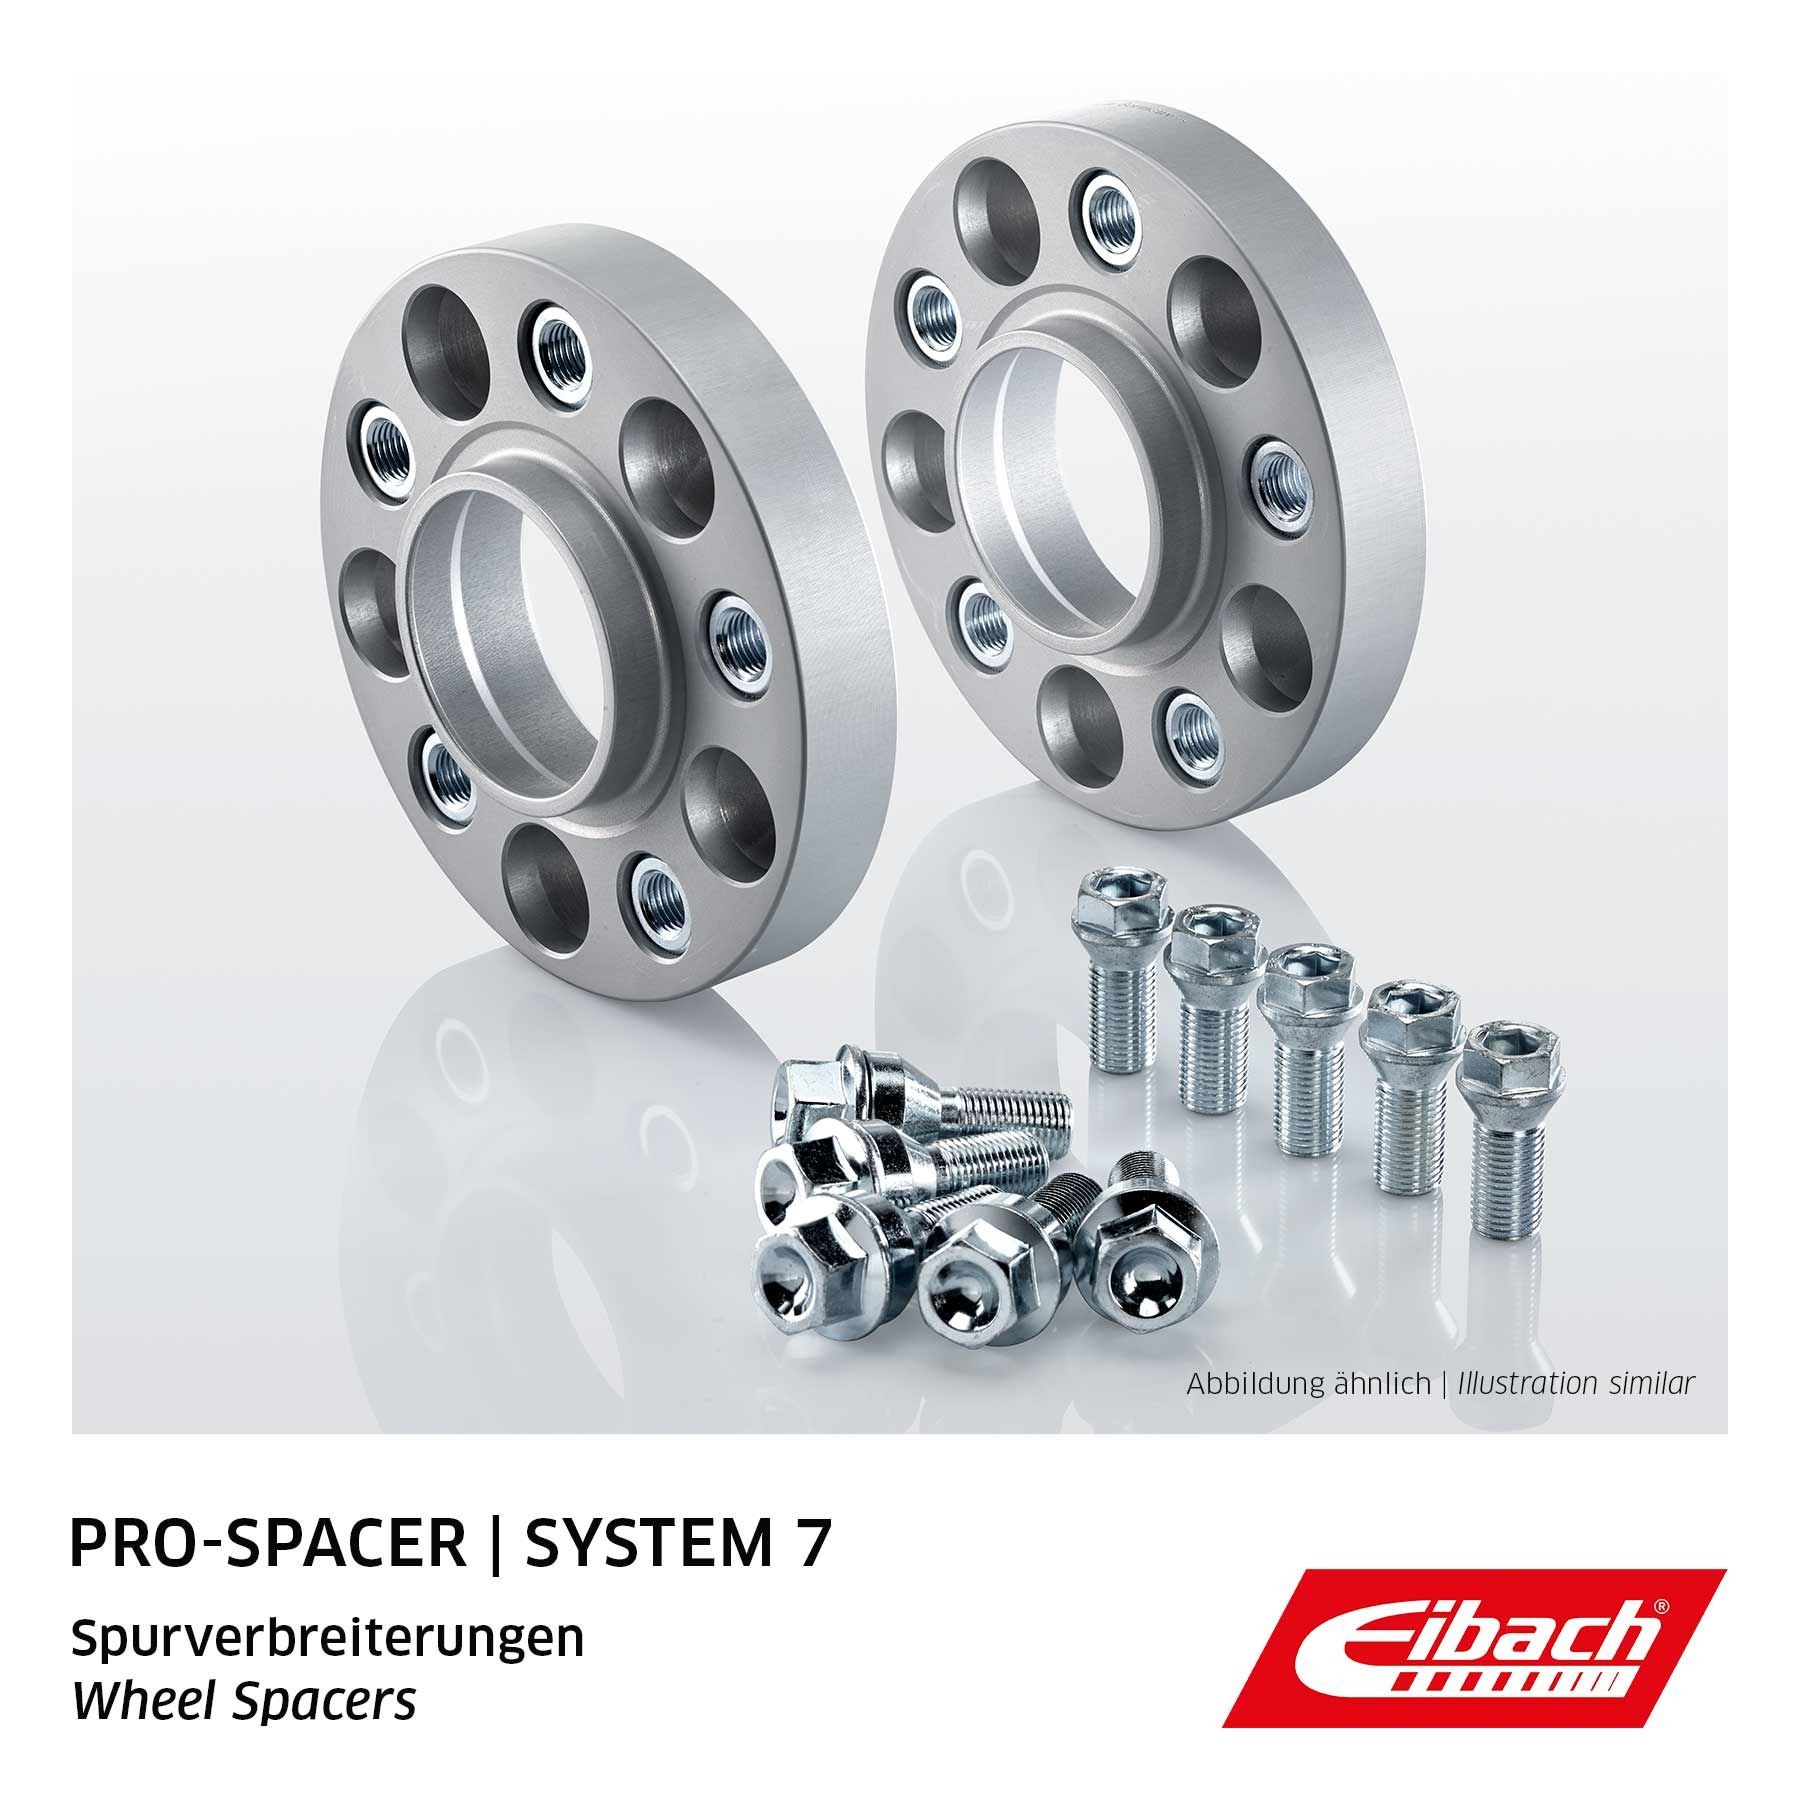 Hub centric wheel spacers EIBACH Pro-Spacer 4x100, 25 mm - S90-7-25-026